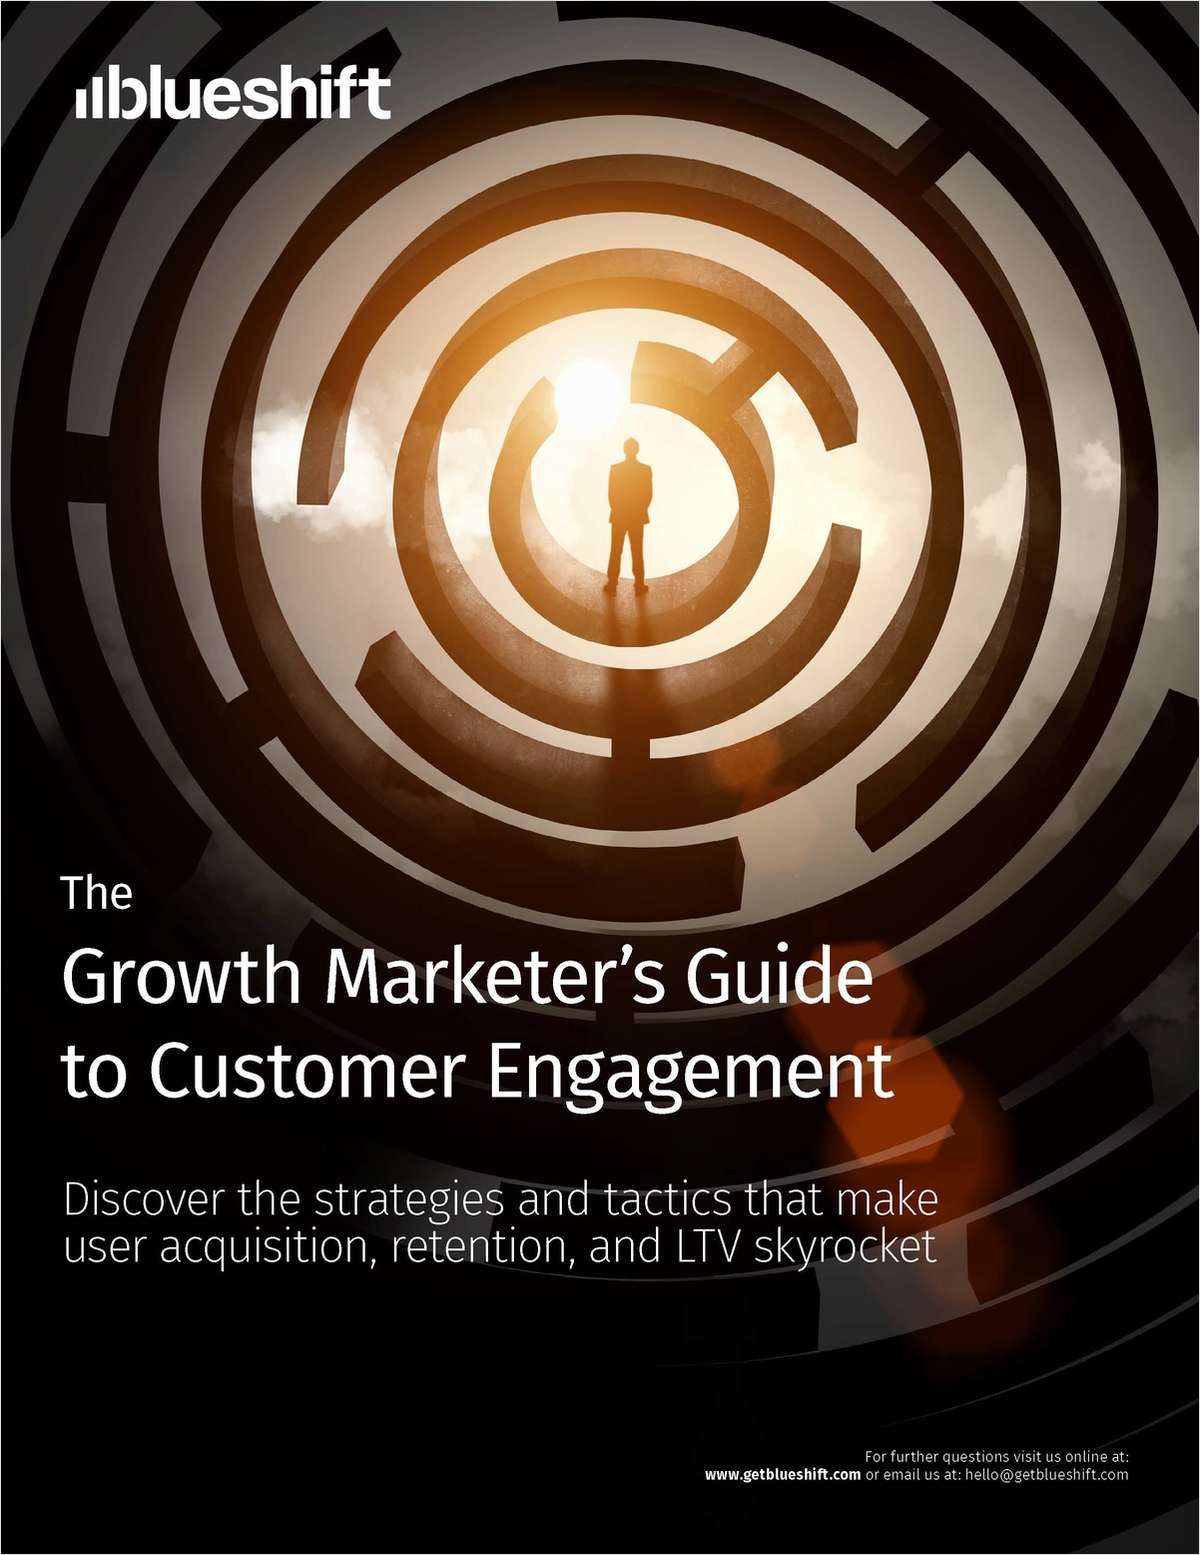 The Growth Marketer's Guide to Customer Engagement